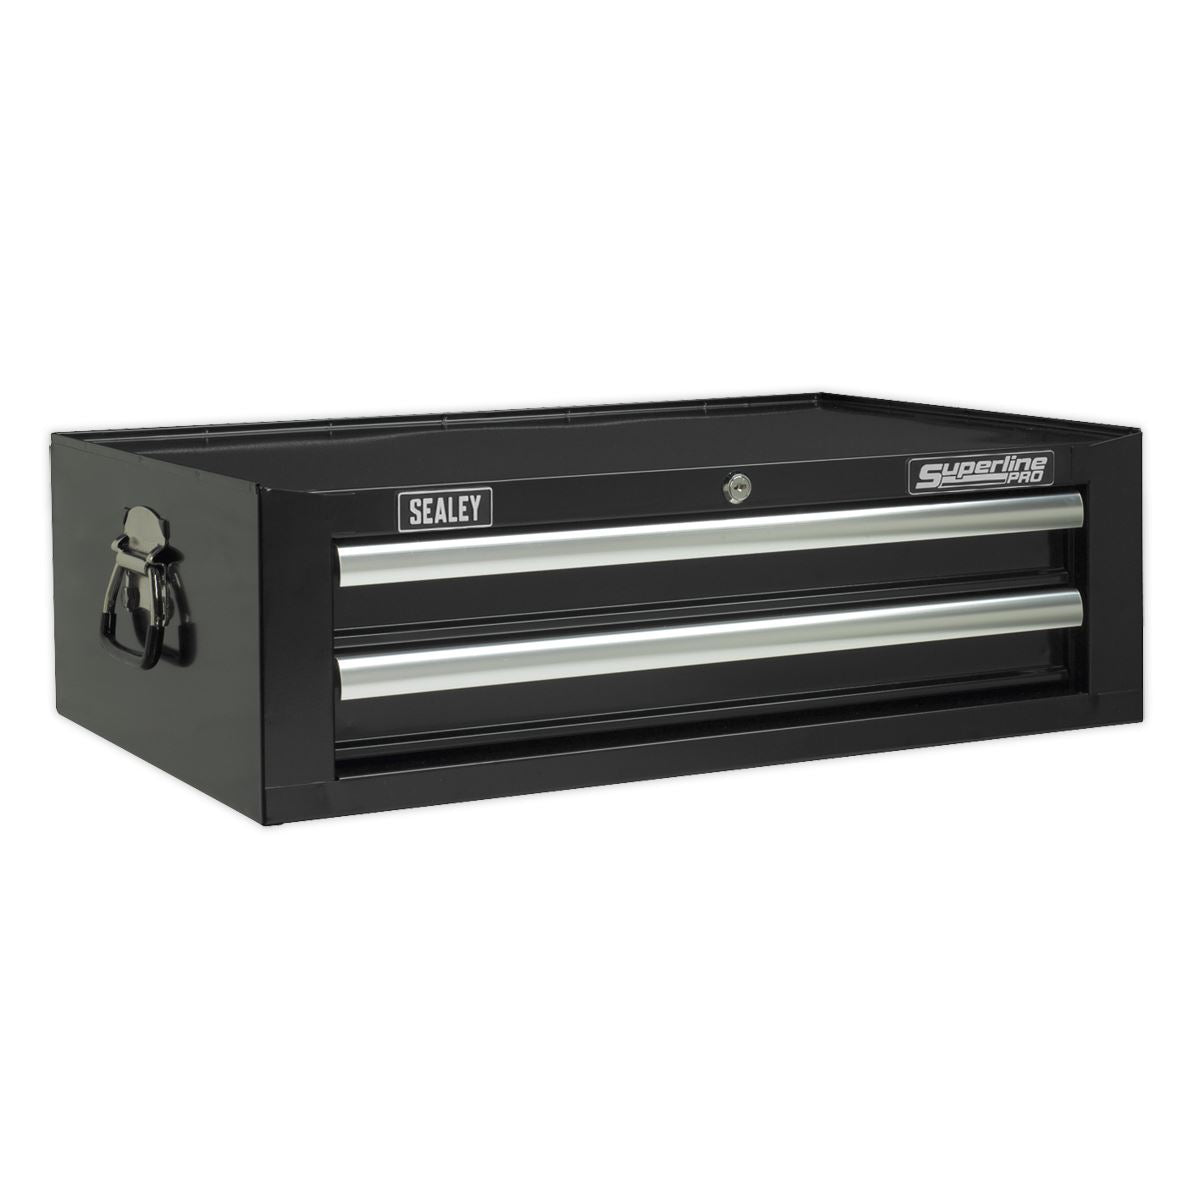 Sealey Superline Pro Mid-Box Tool Chest 2 Drawer with Ball-Bearing Slides - Black